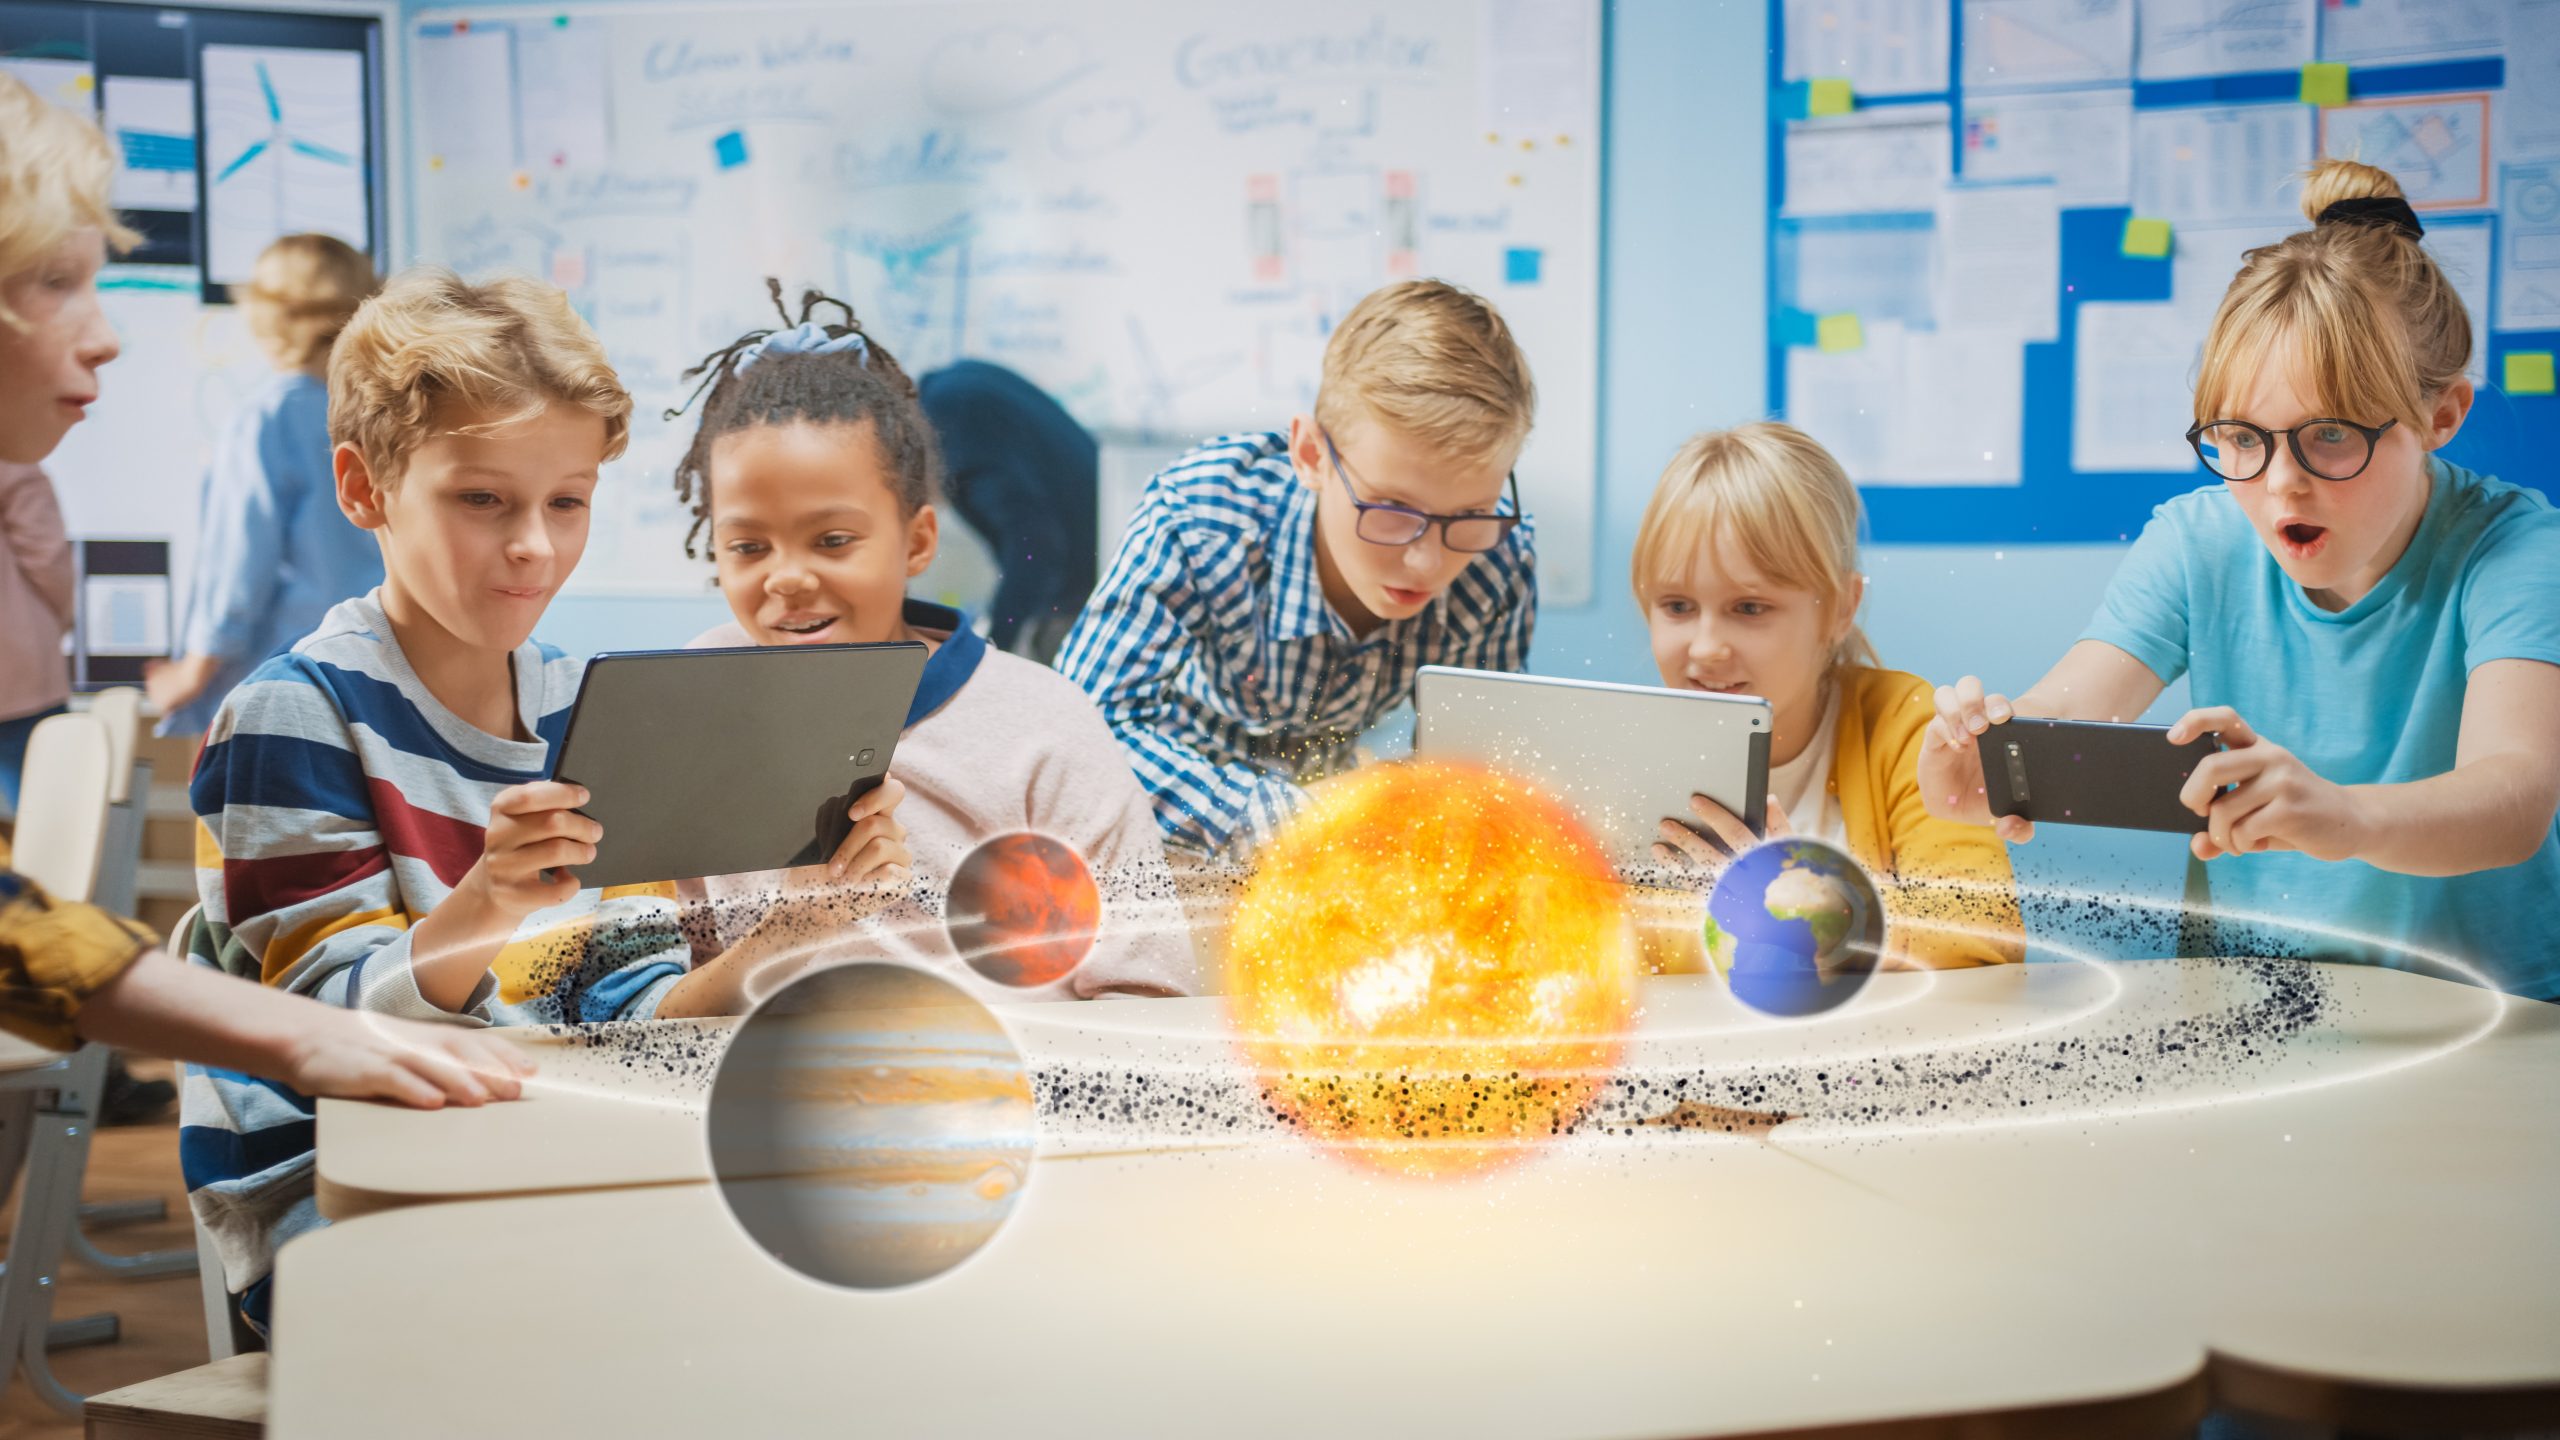 Group of School Children in Science Class Use Digital Tablet Computers with Augmented Reality Software, Looking at Educational 3D Animation Of Solar System. VFX, Special Effects Render